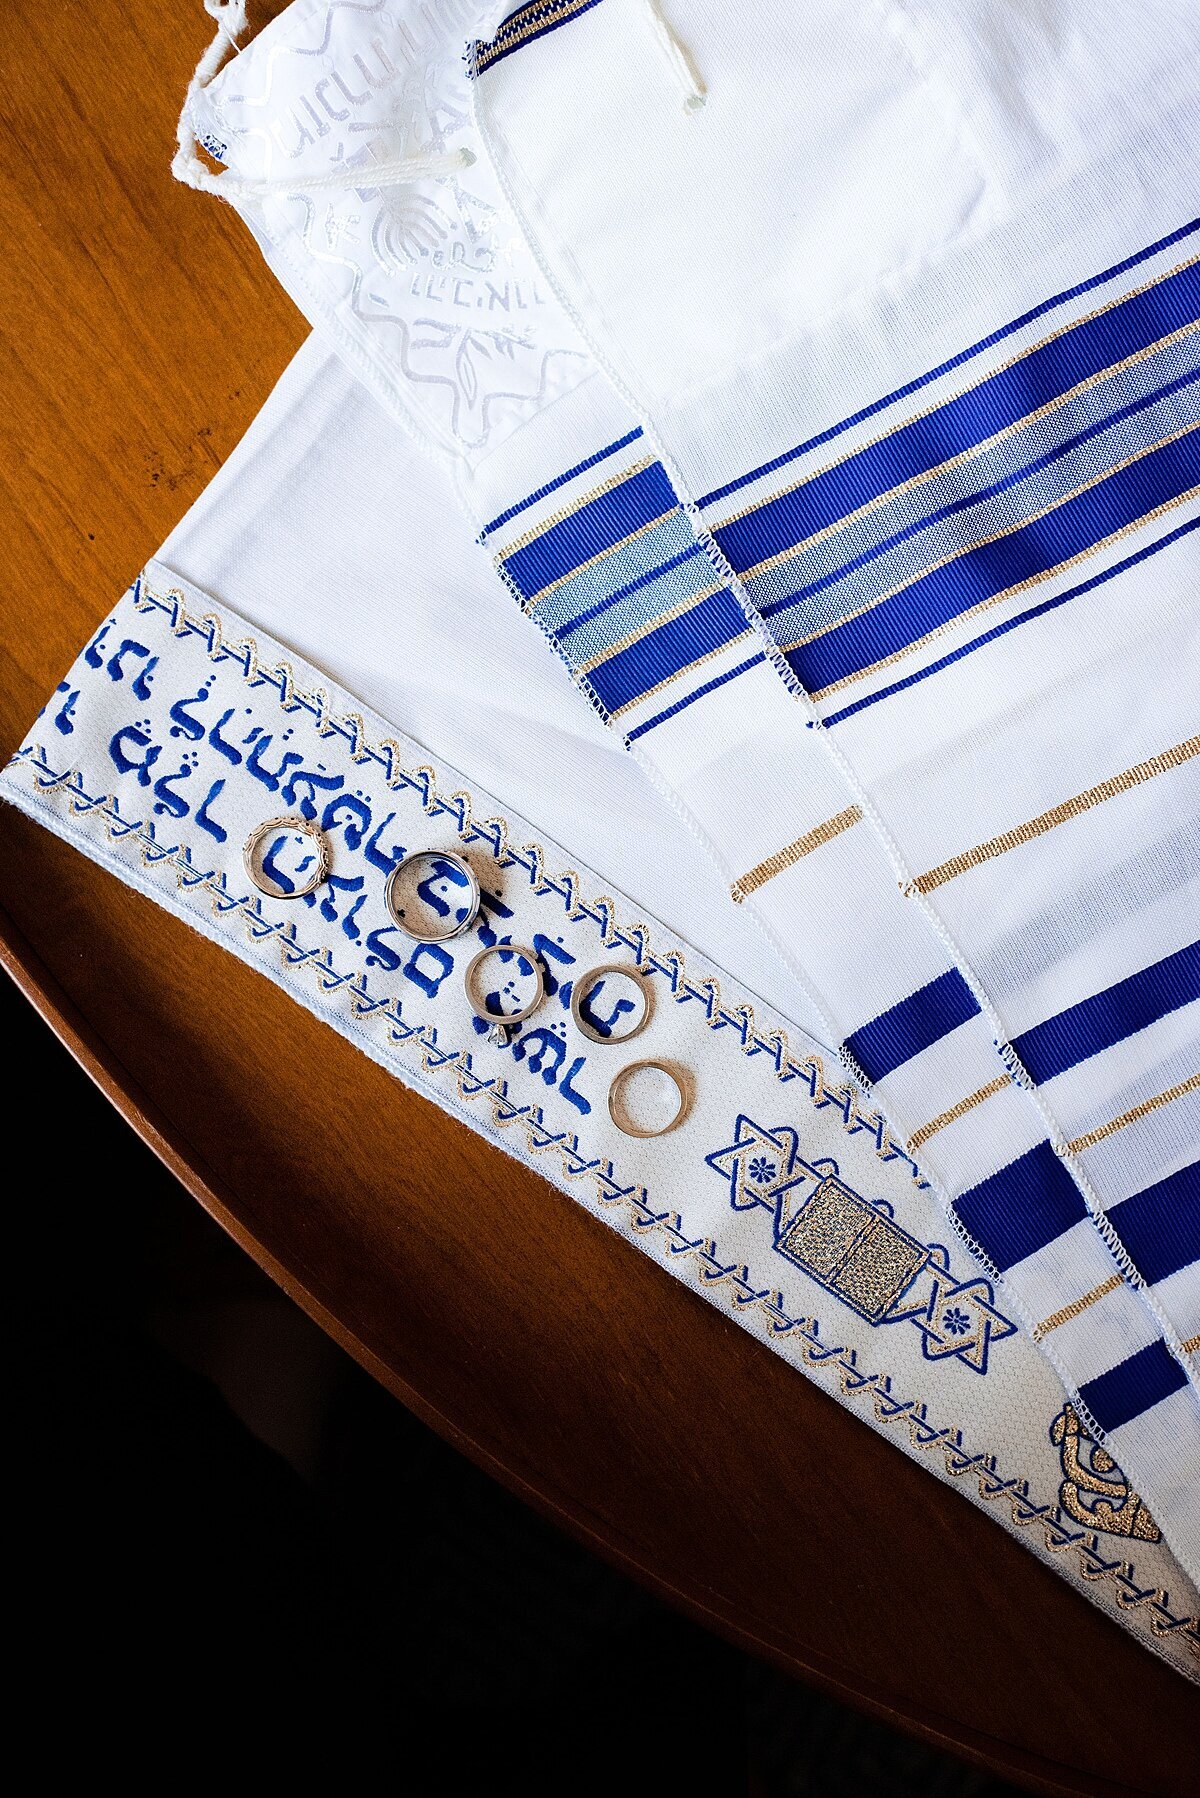 Detail photo of tallit with wedding rings